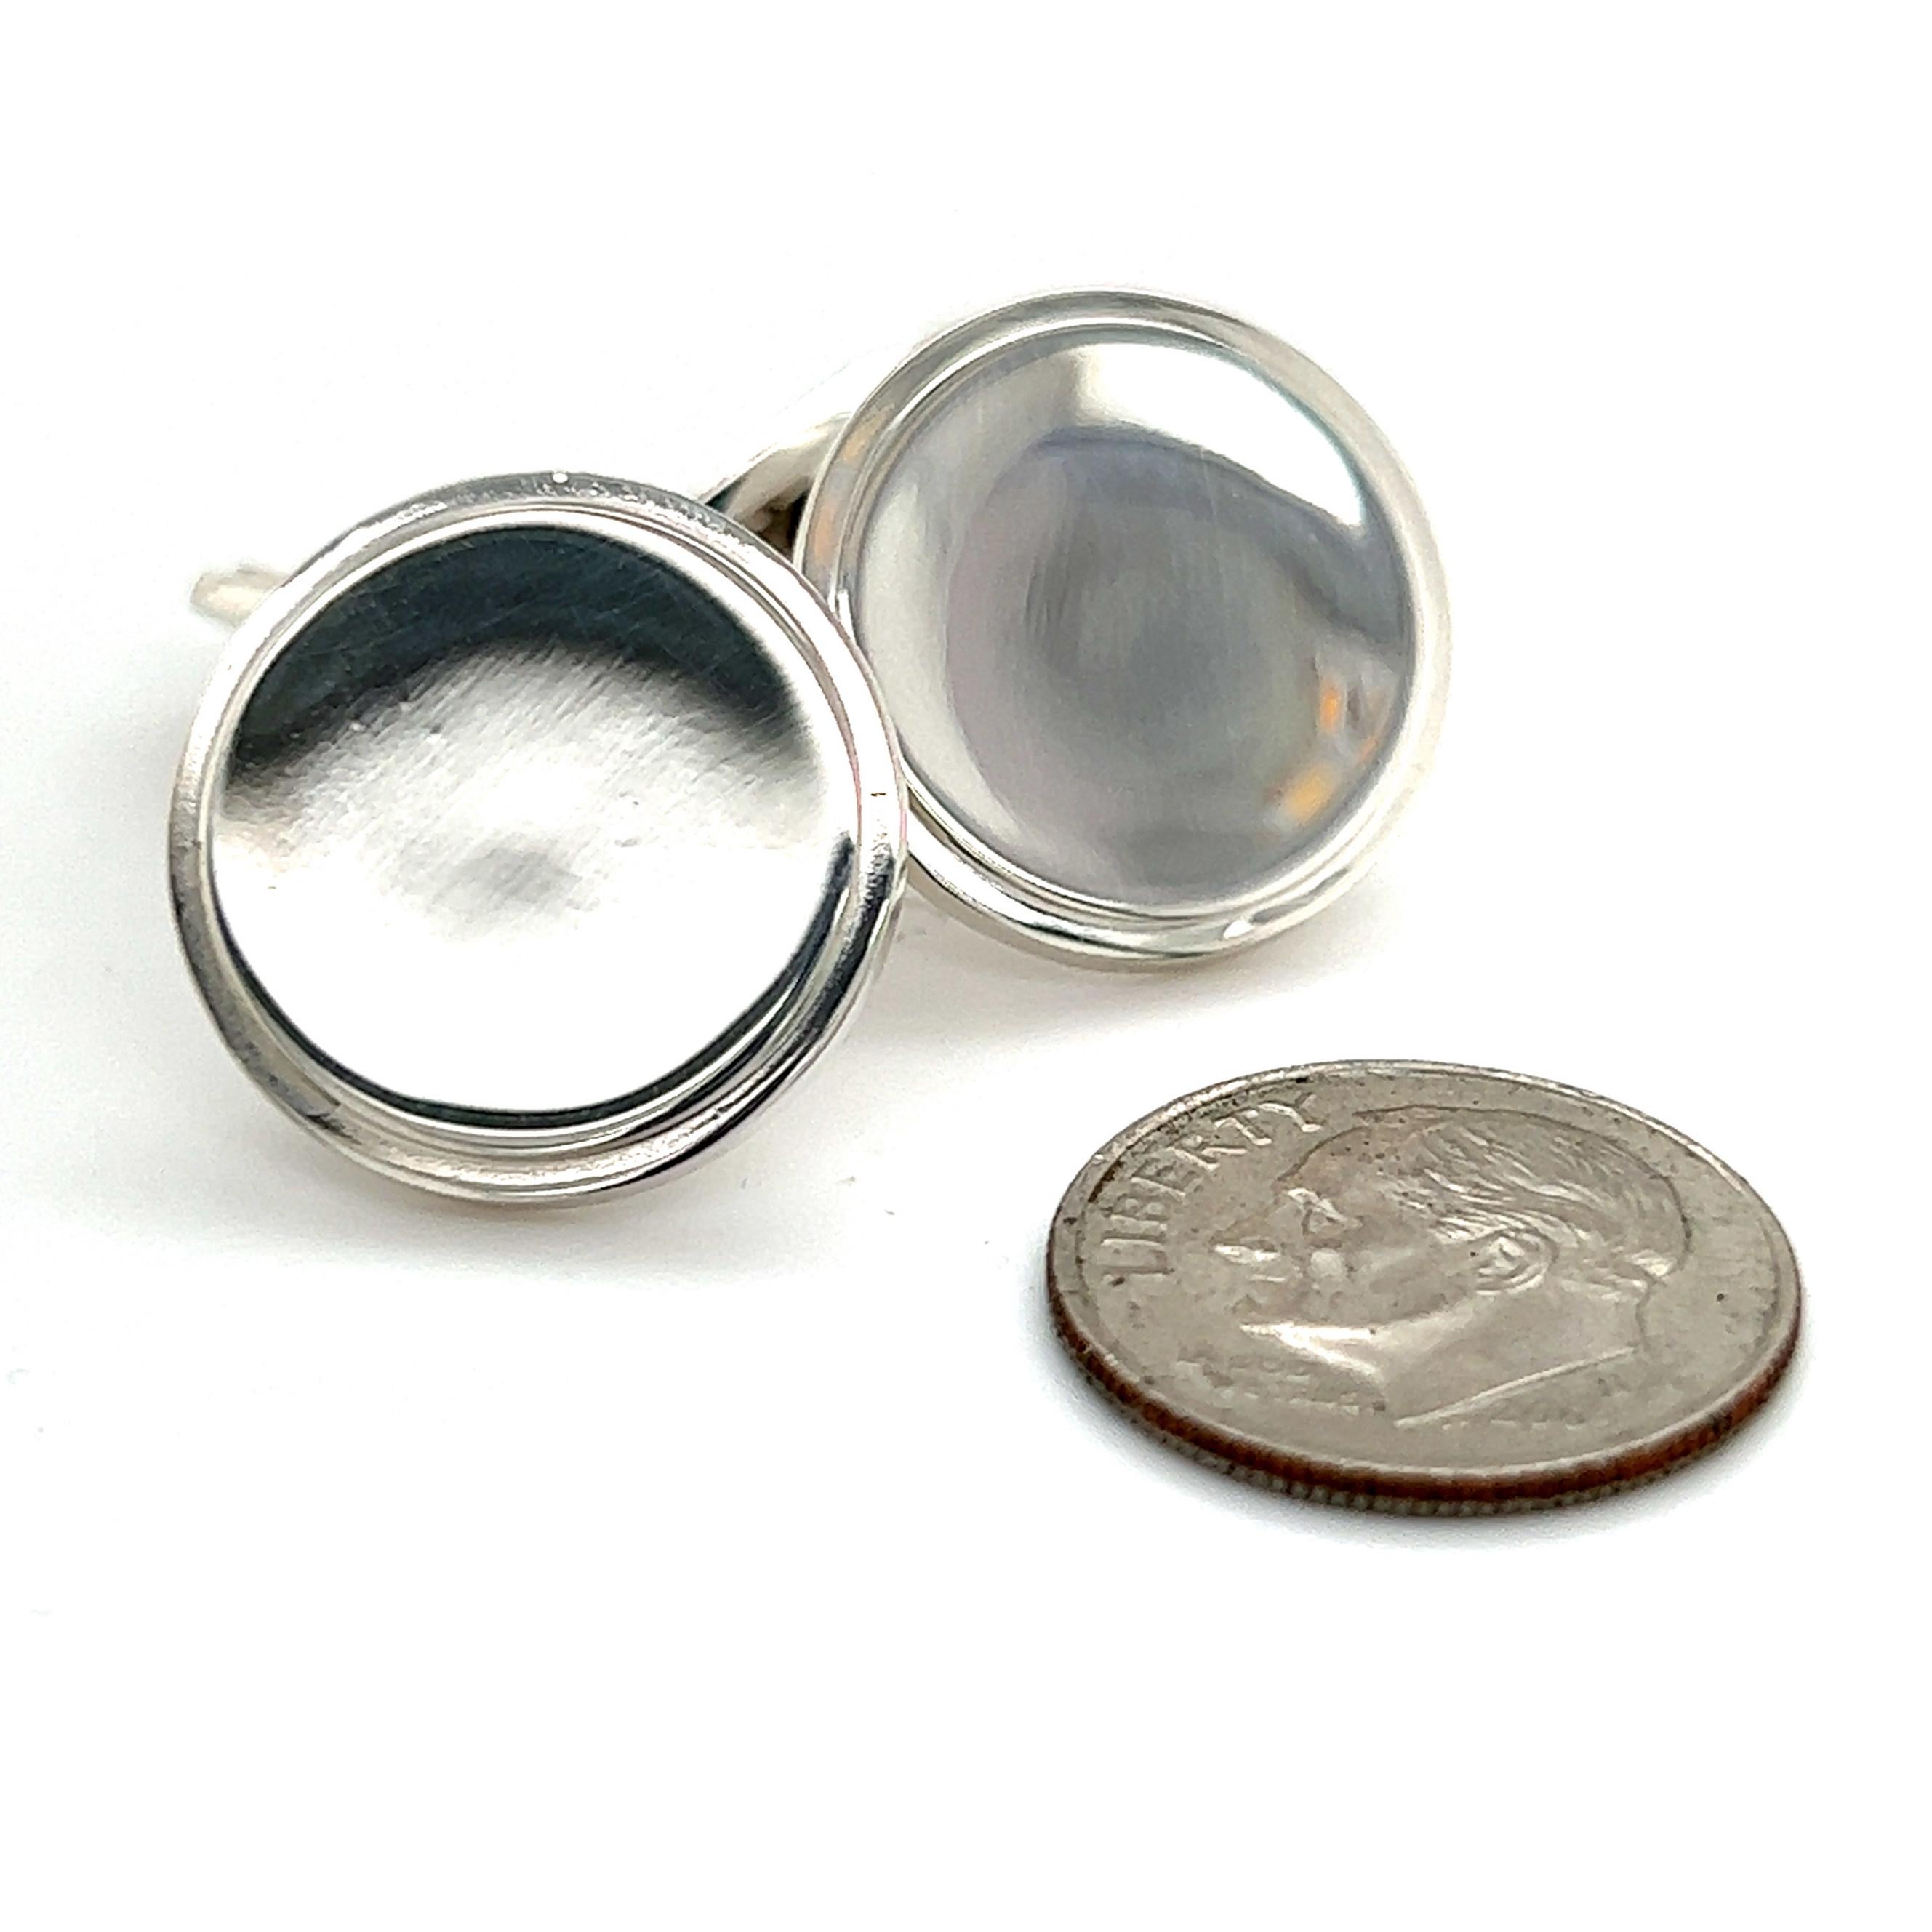 Georg Jensen Estate Sterling Silver Cufflinks 16.84 Grams In Good Condition For Sale In Brooklyn, NY